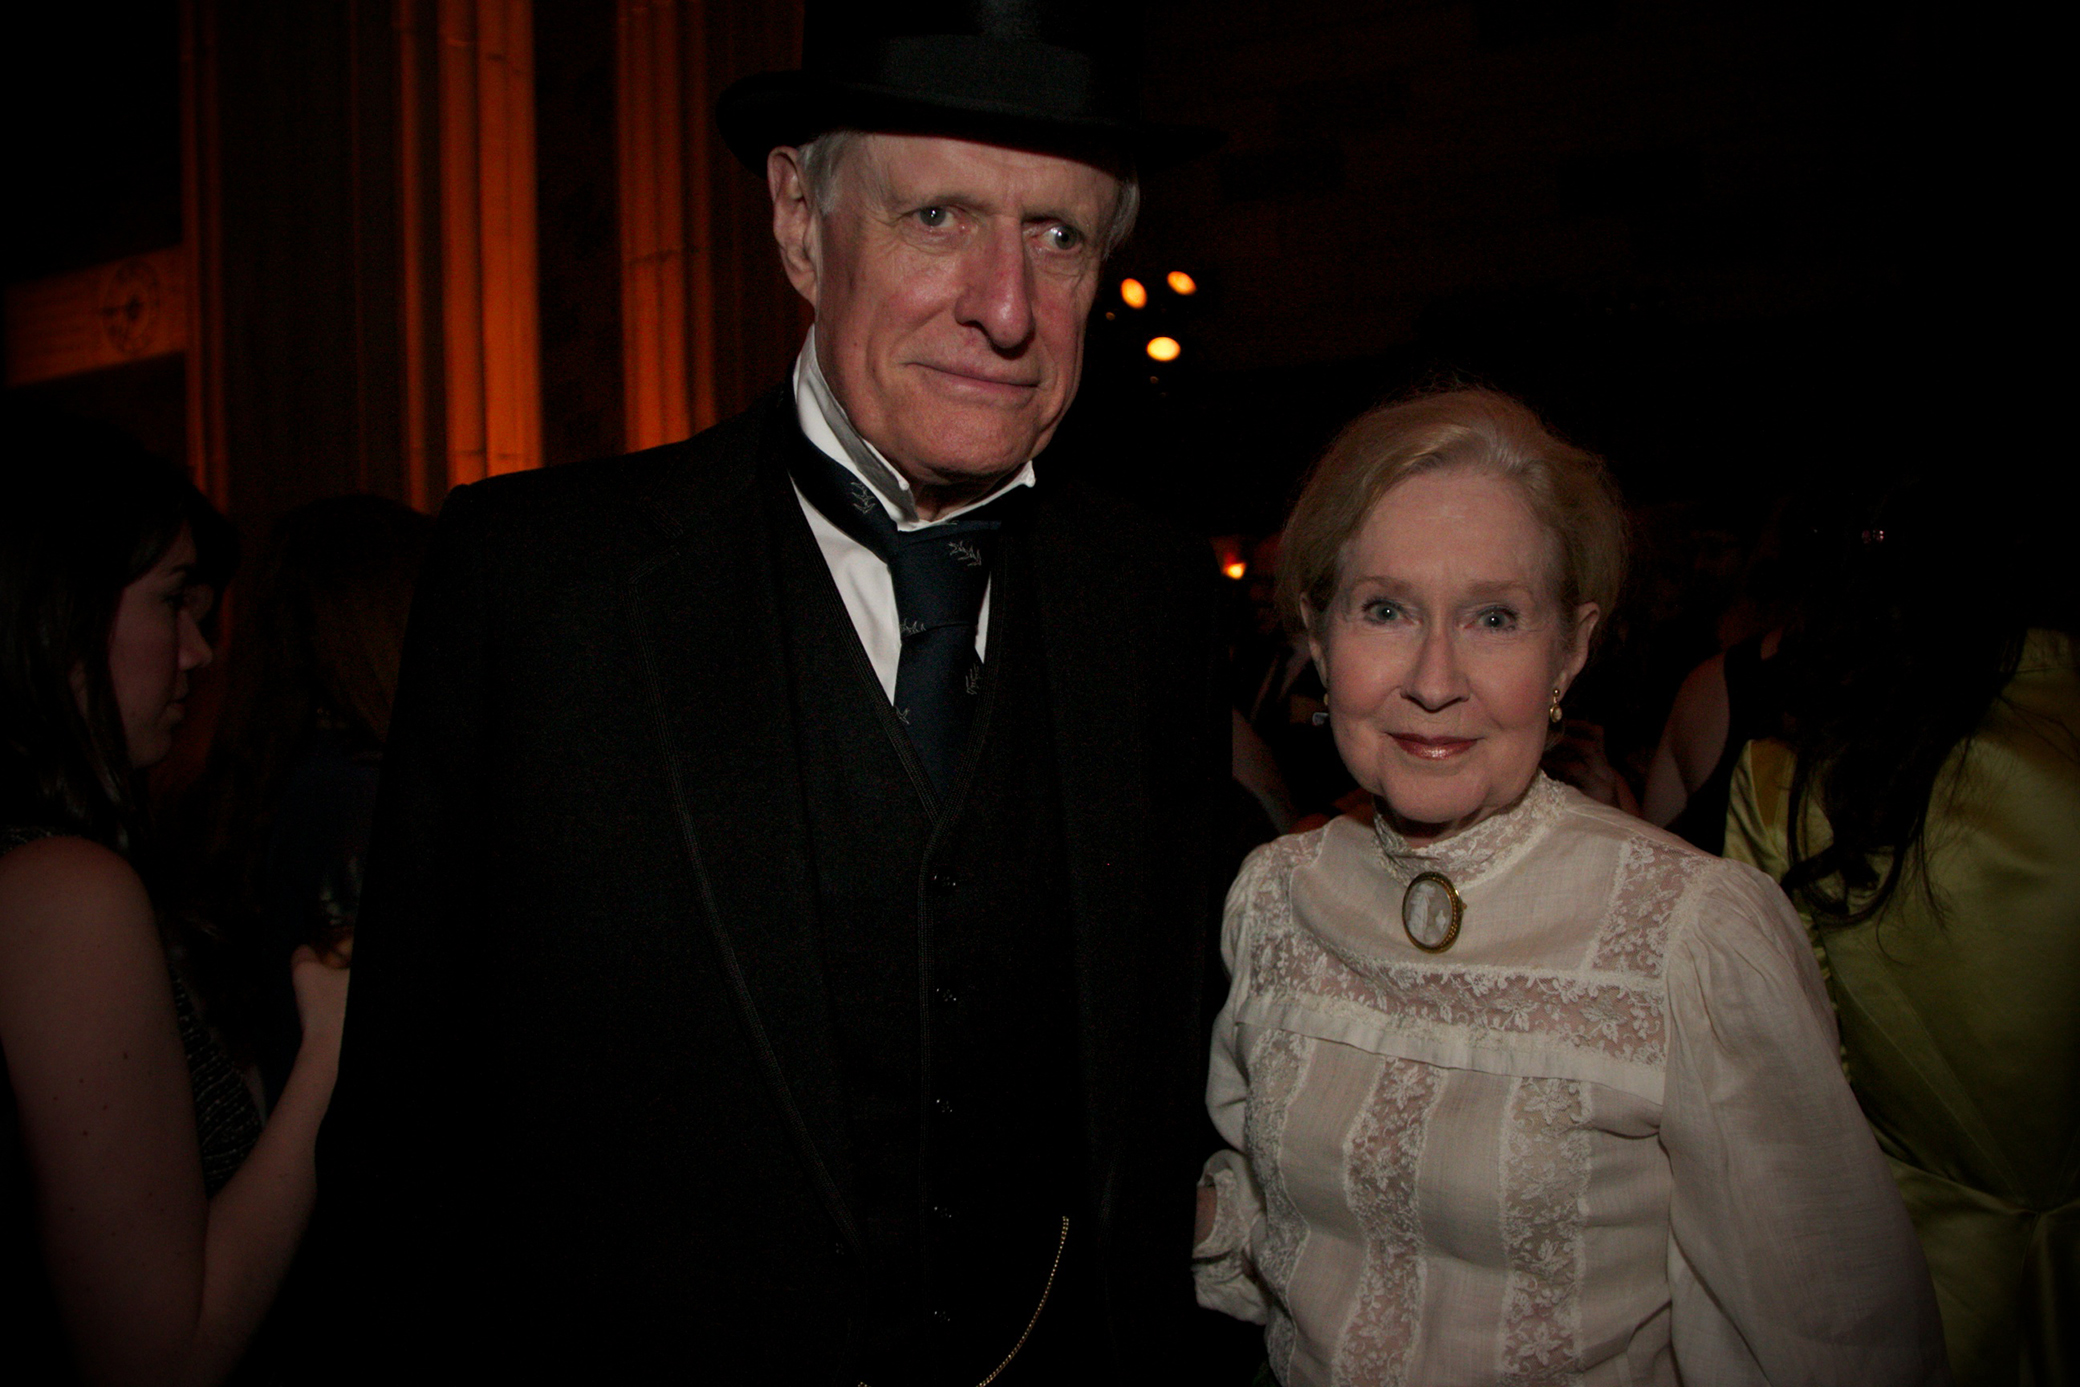 Photograph of Arthur Yorke Allen and Mary Stewart Hammond at the 1870s Decade Ball, 2014.